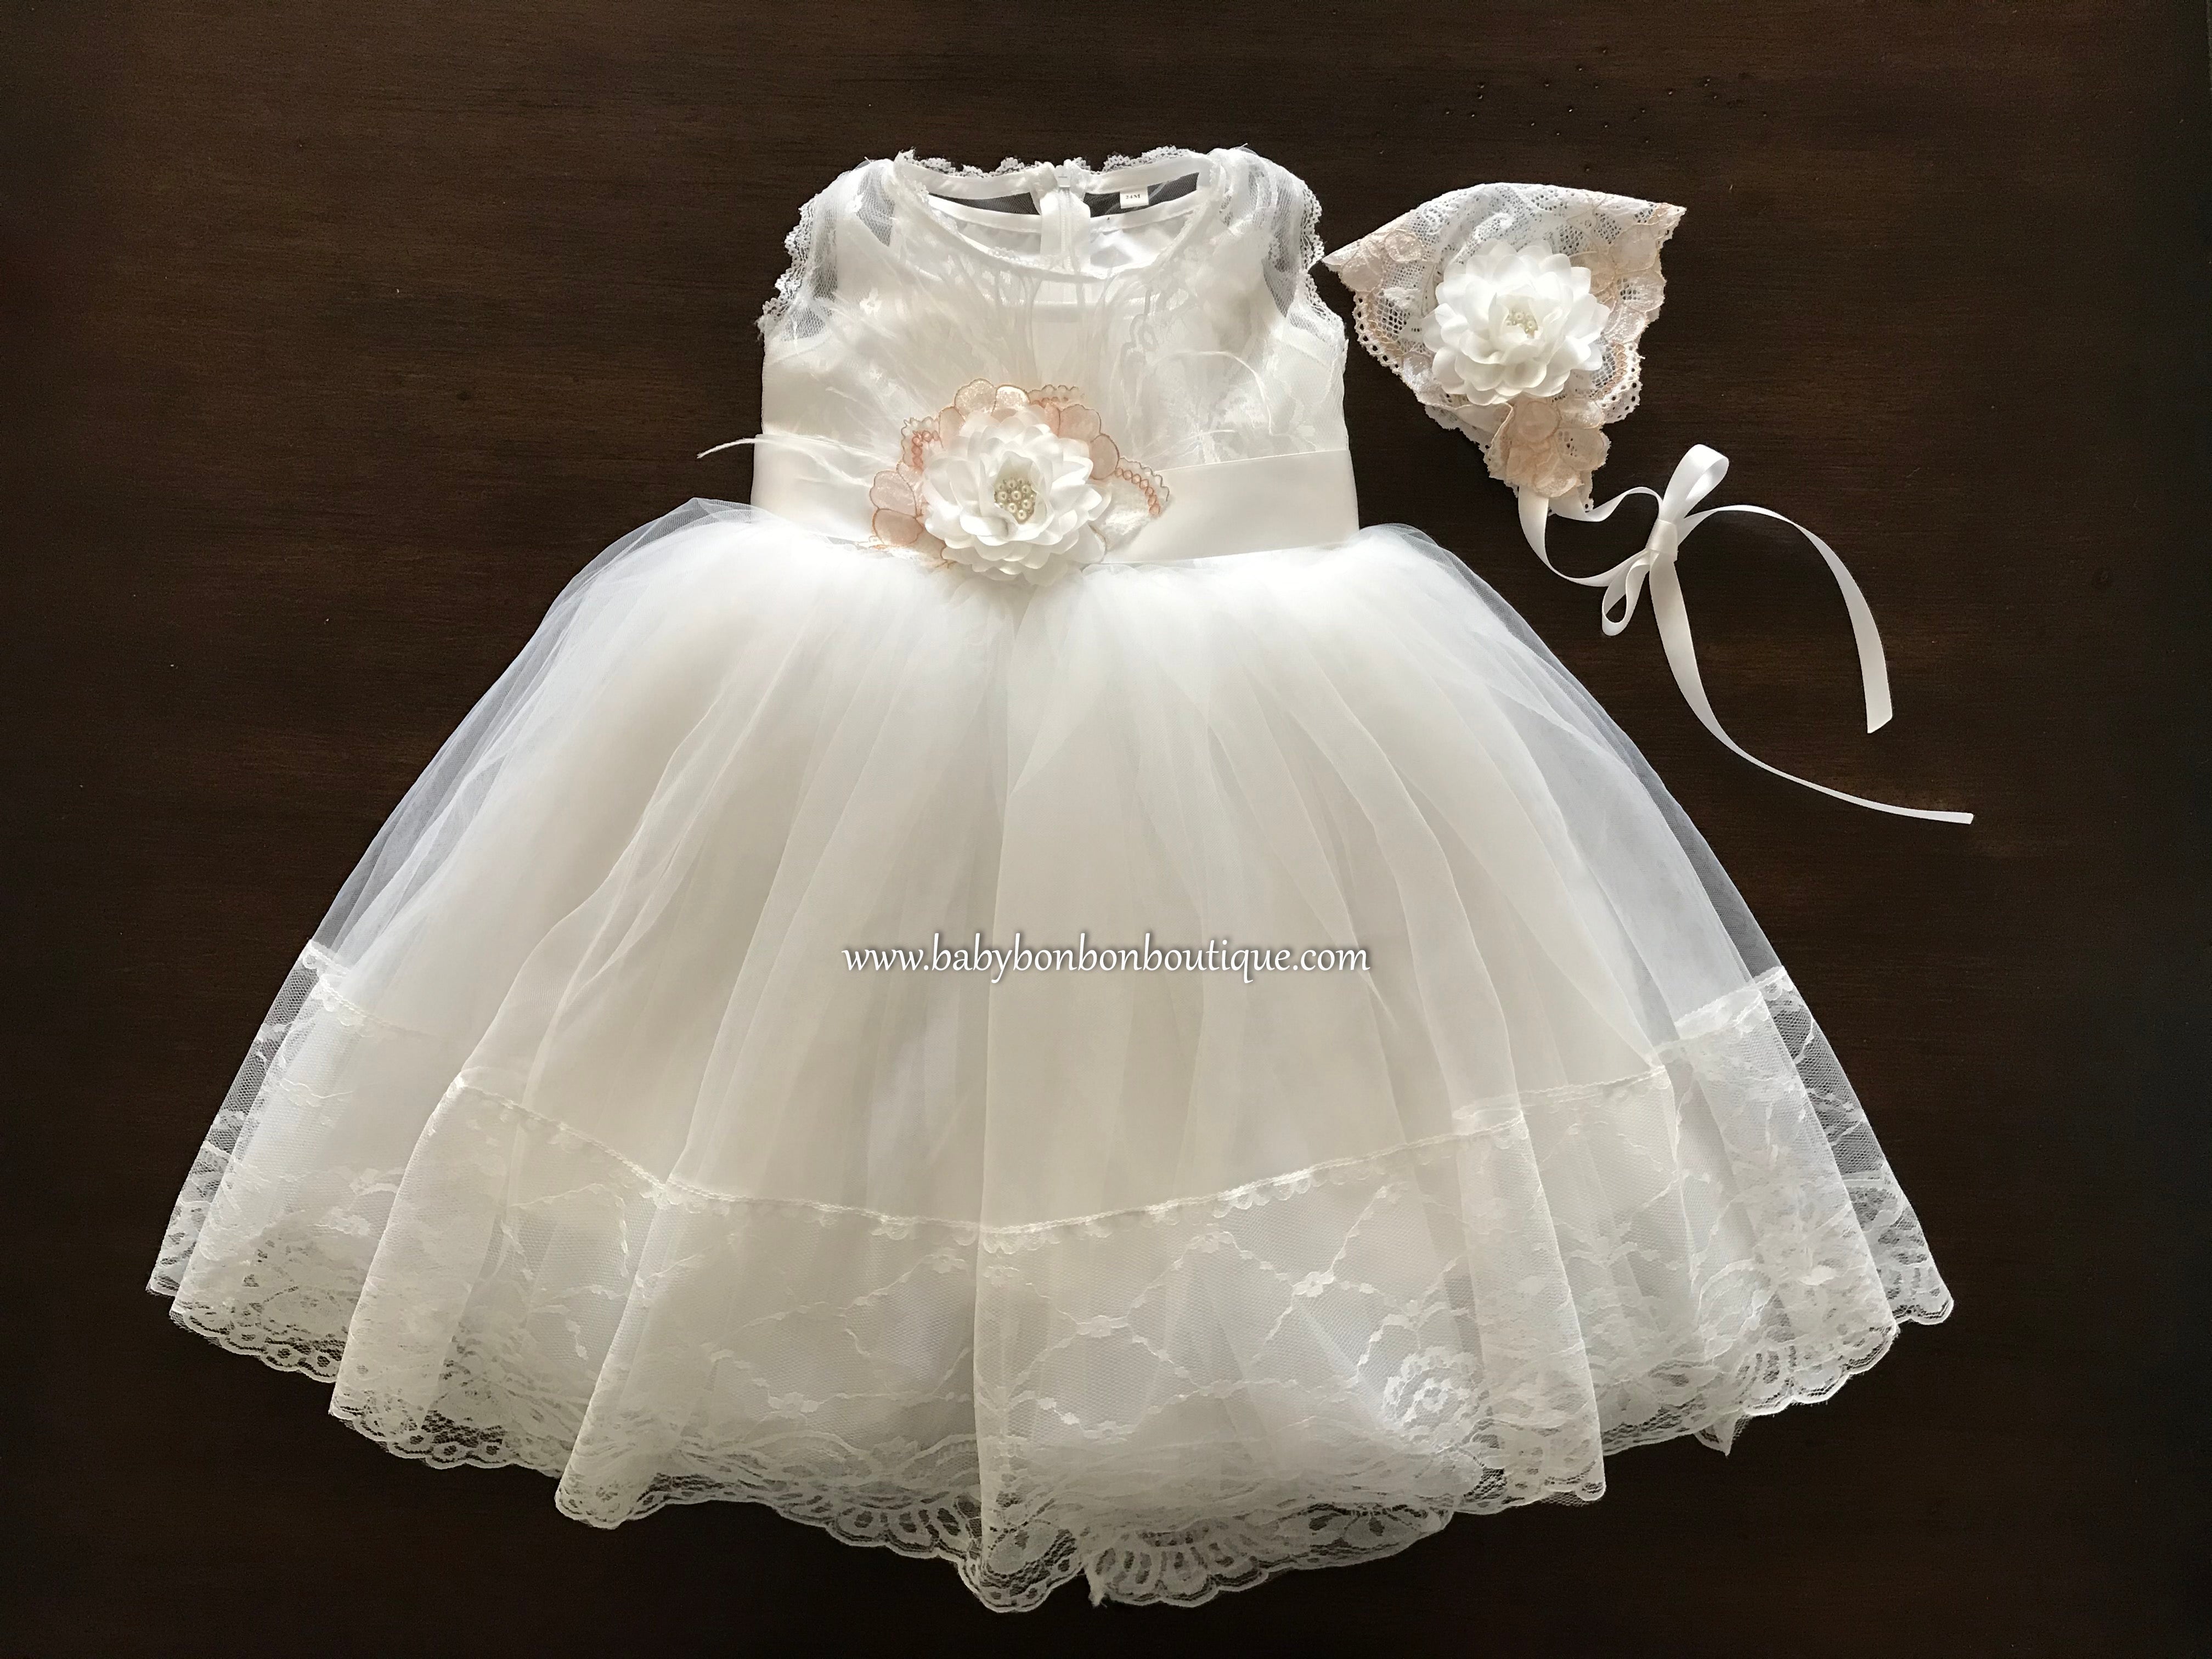 Ivory Tulle Lace Ballgown Baby Lace Sleeve Communion Dress With Train  Perfect For First Communion, Baptism, Wedding Guests Available In Junior,  Toddler, And Little Kid Sizes From Uniquebridalboutique, $71.33 | DHgate.Com